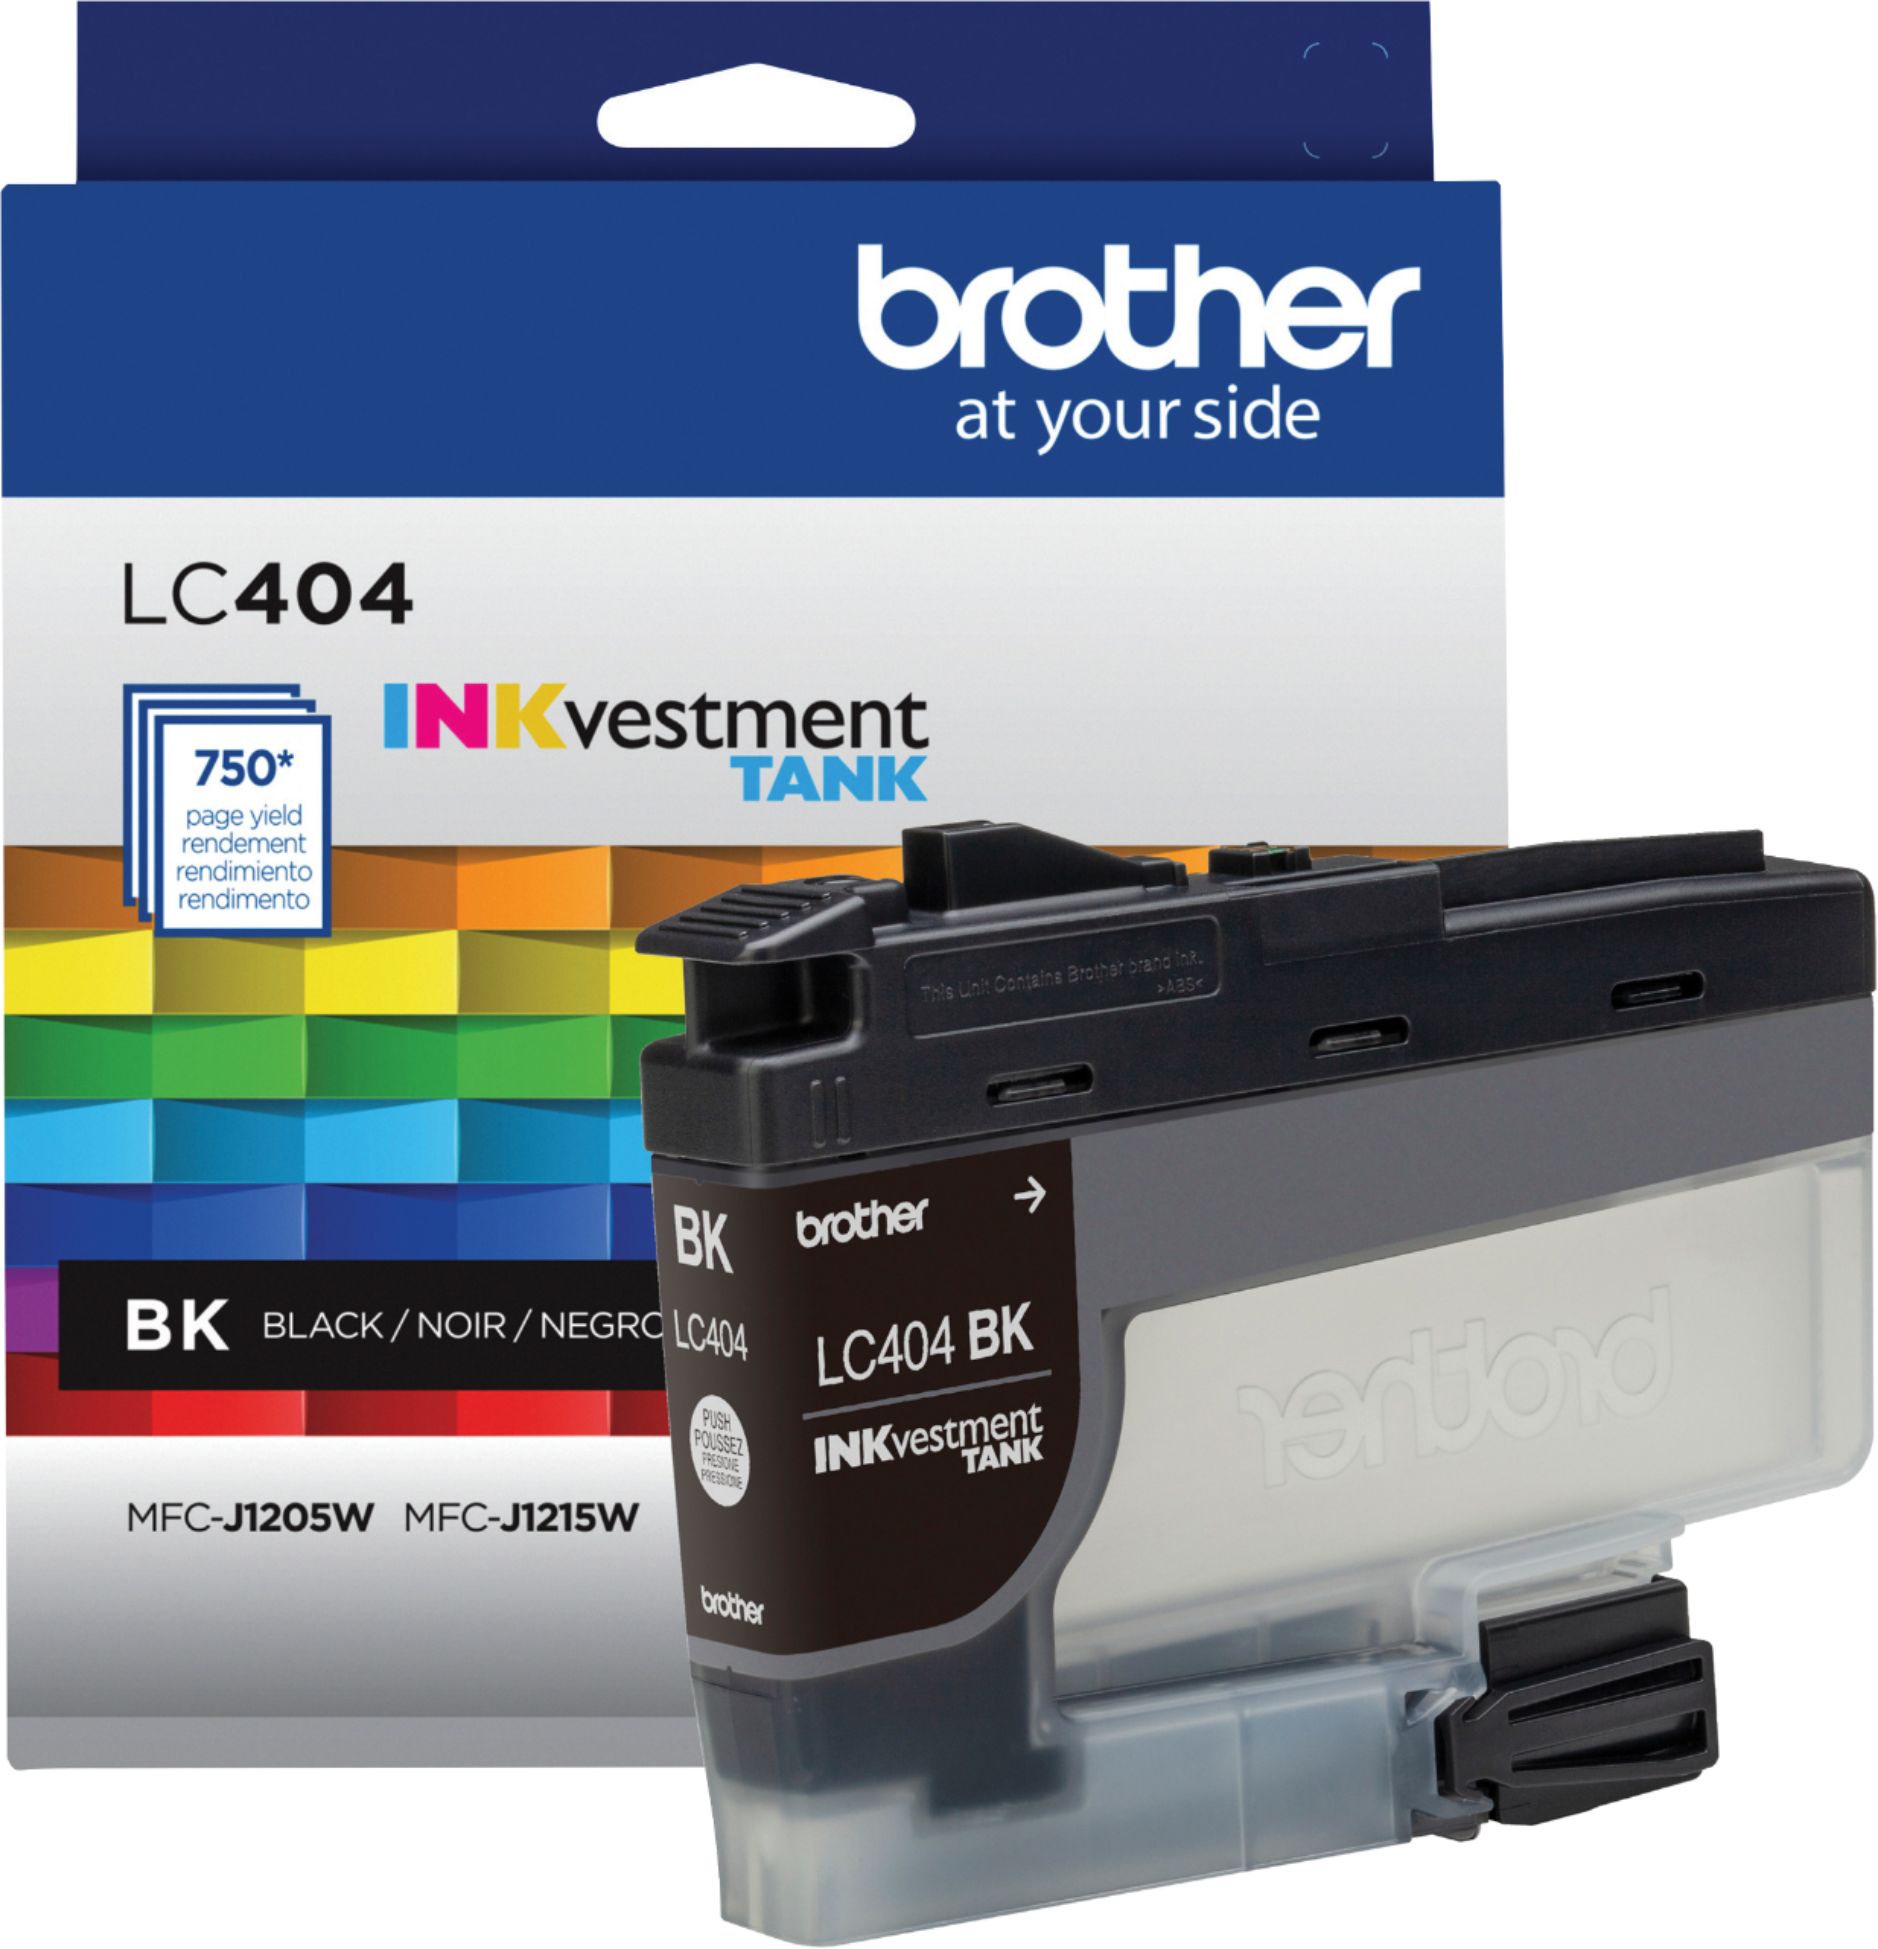 Brother, Genuine Ink and Toner Printer Supplies